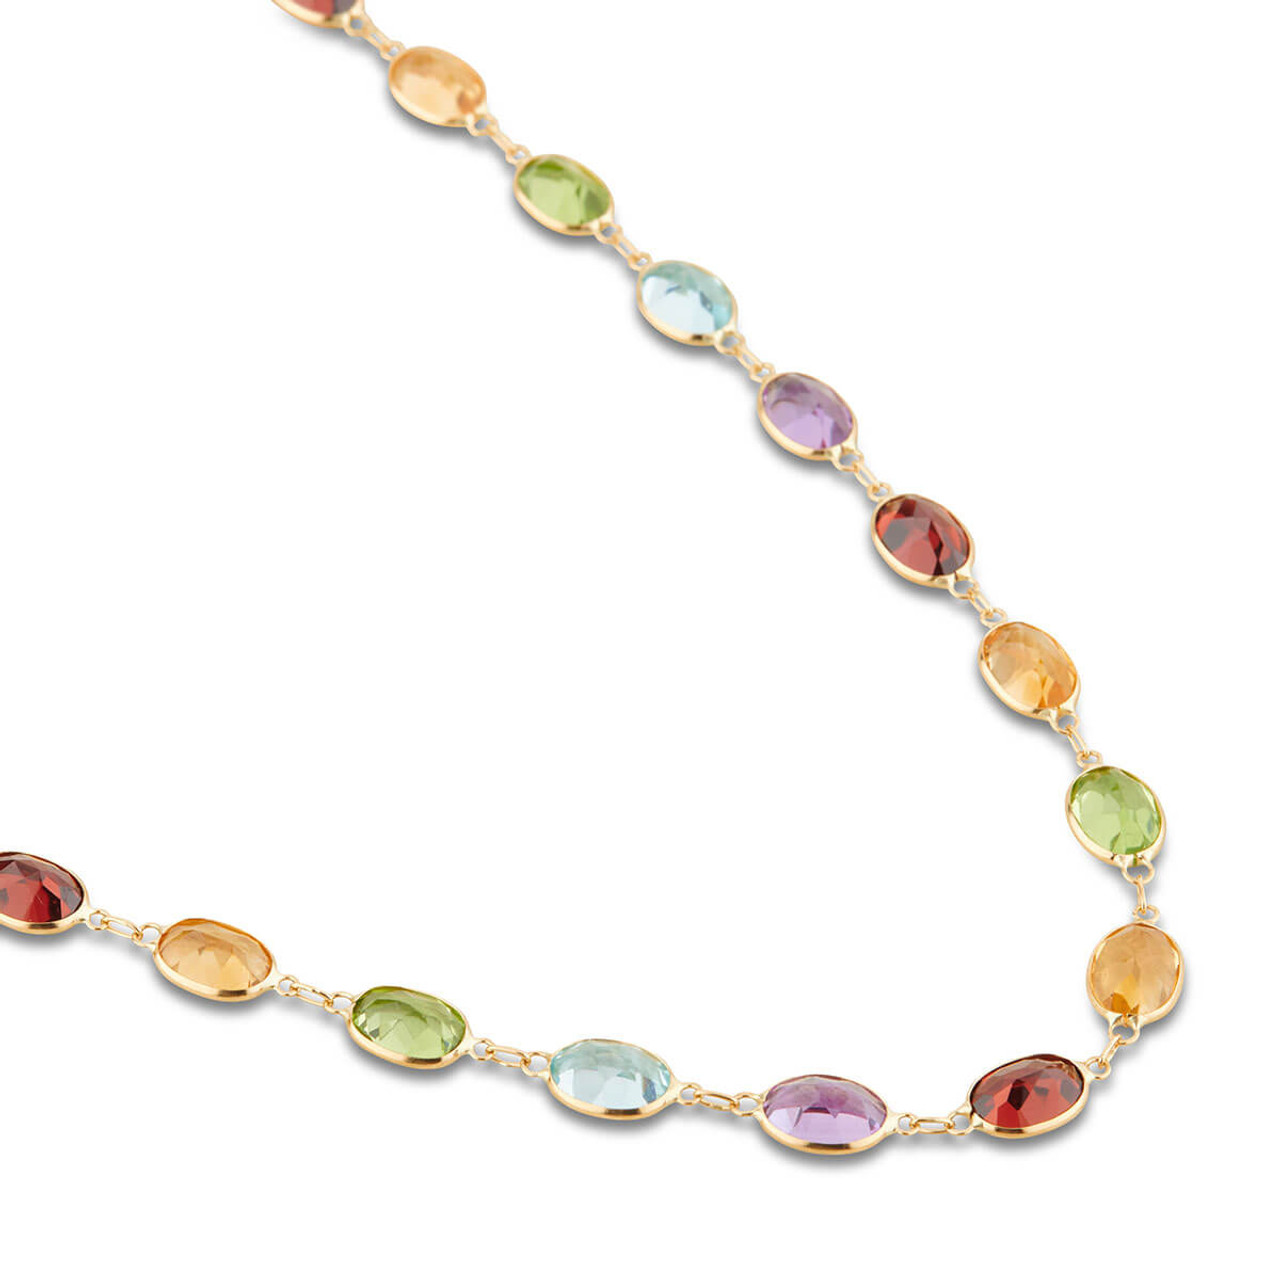 Buy Multi Color Pearls Stone Necklace by Do Taara Online at Aza Fashions.